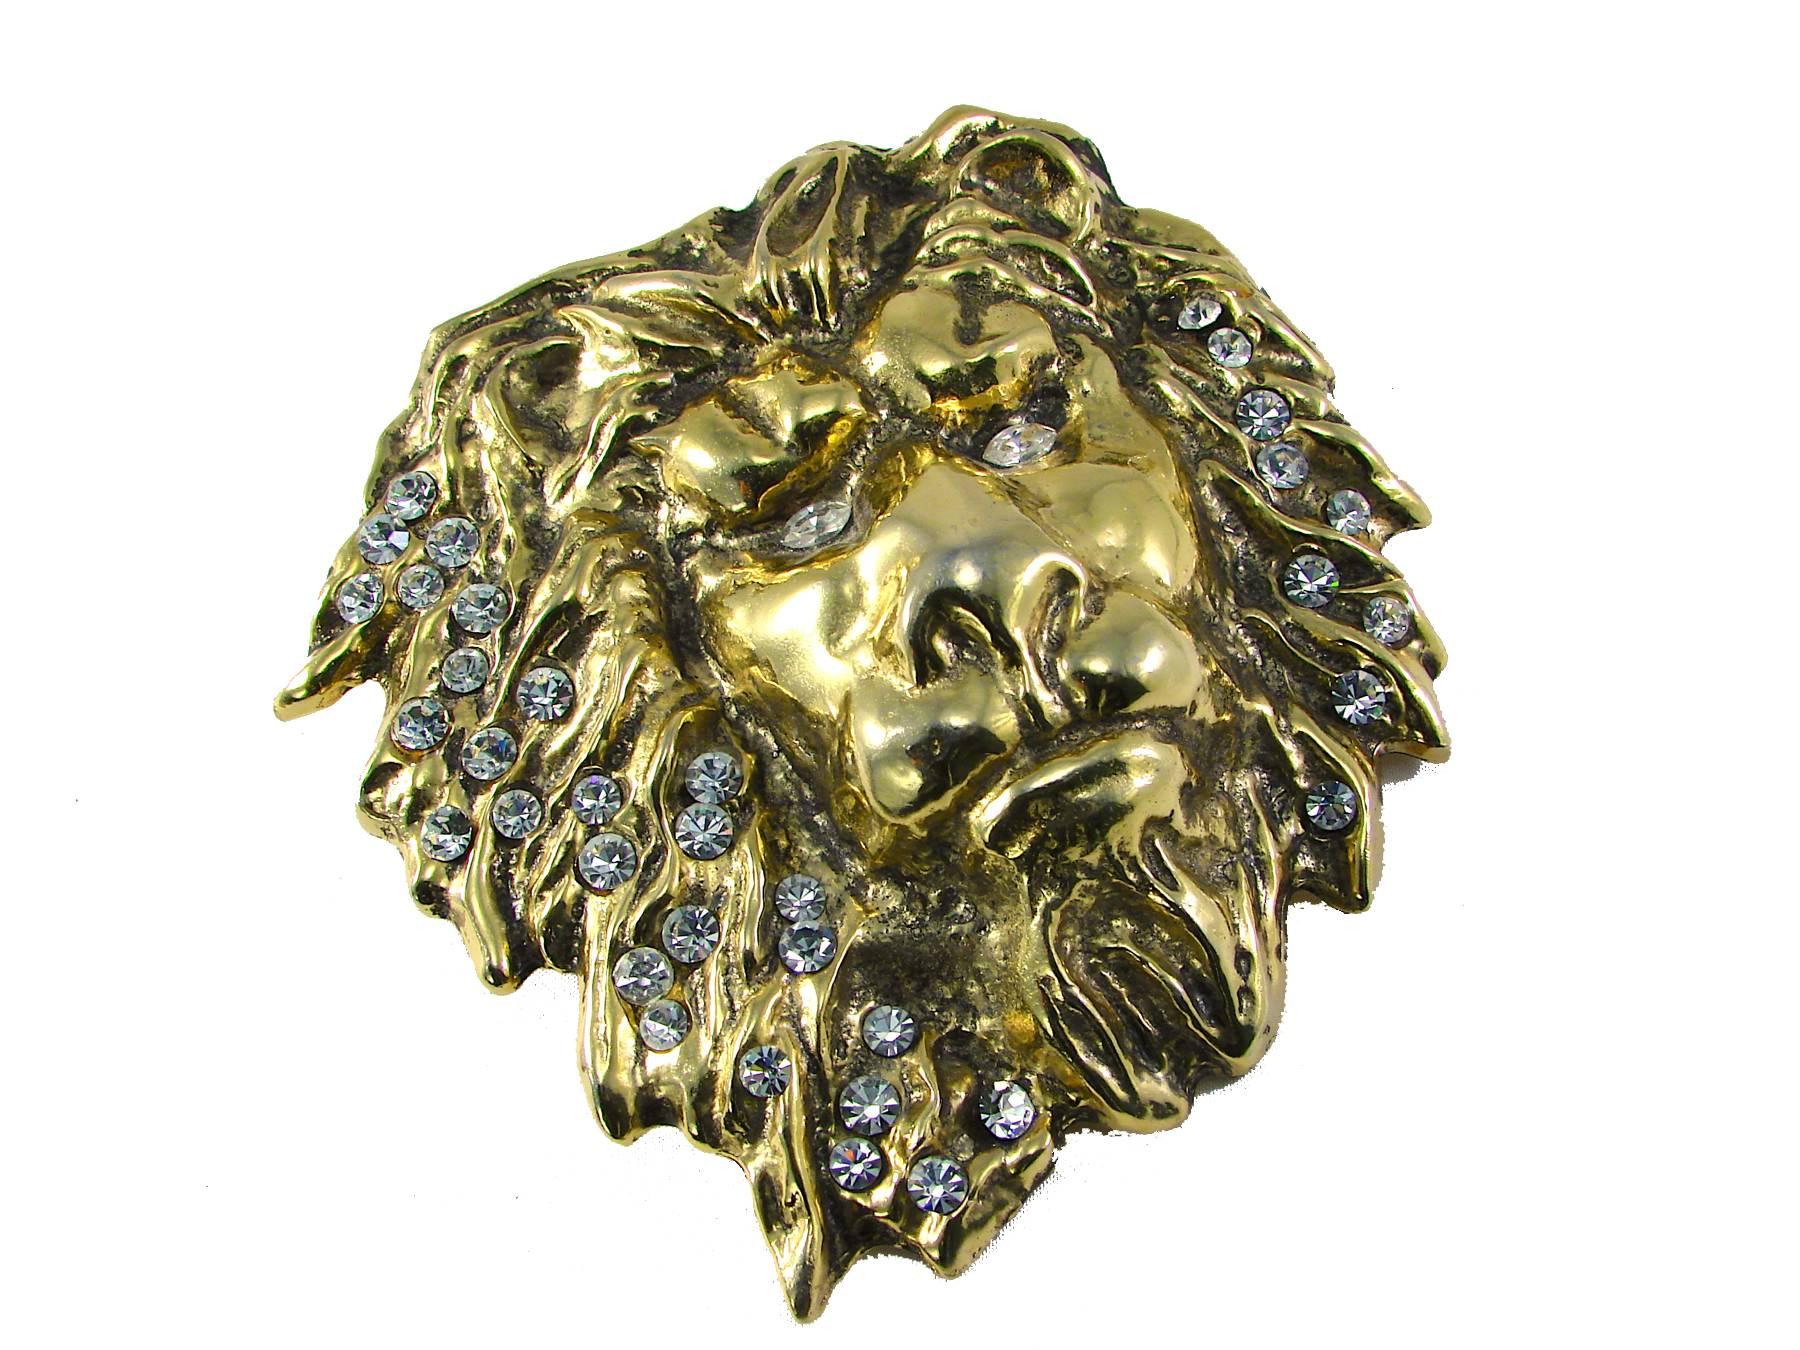 This unusual belt buckle was made by Laloon in the early 1980s.  Made from gold metal, it features rhinestone accents throughout the mane and in the eyes.
Substantial in size, it measures 4.5